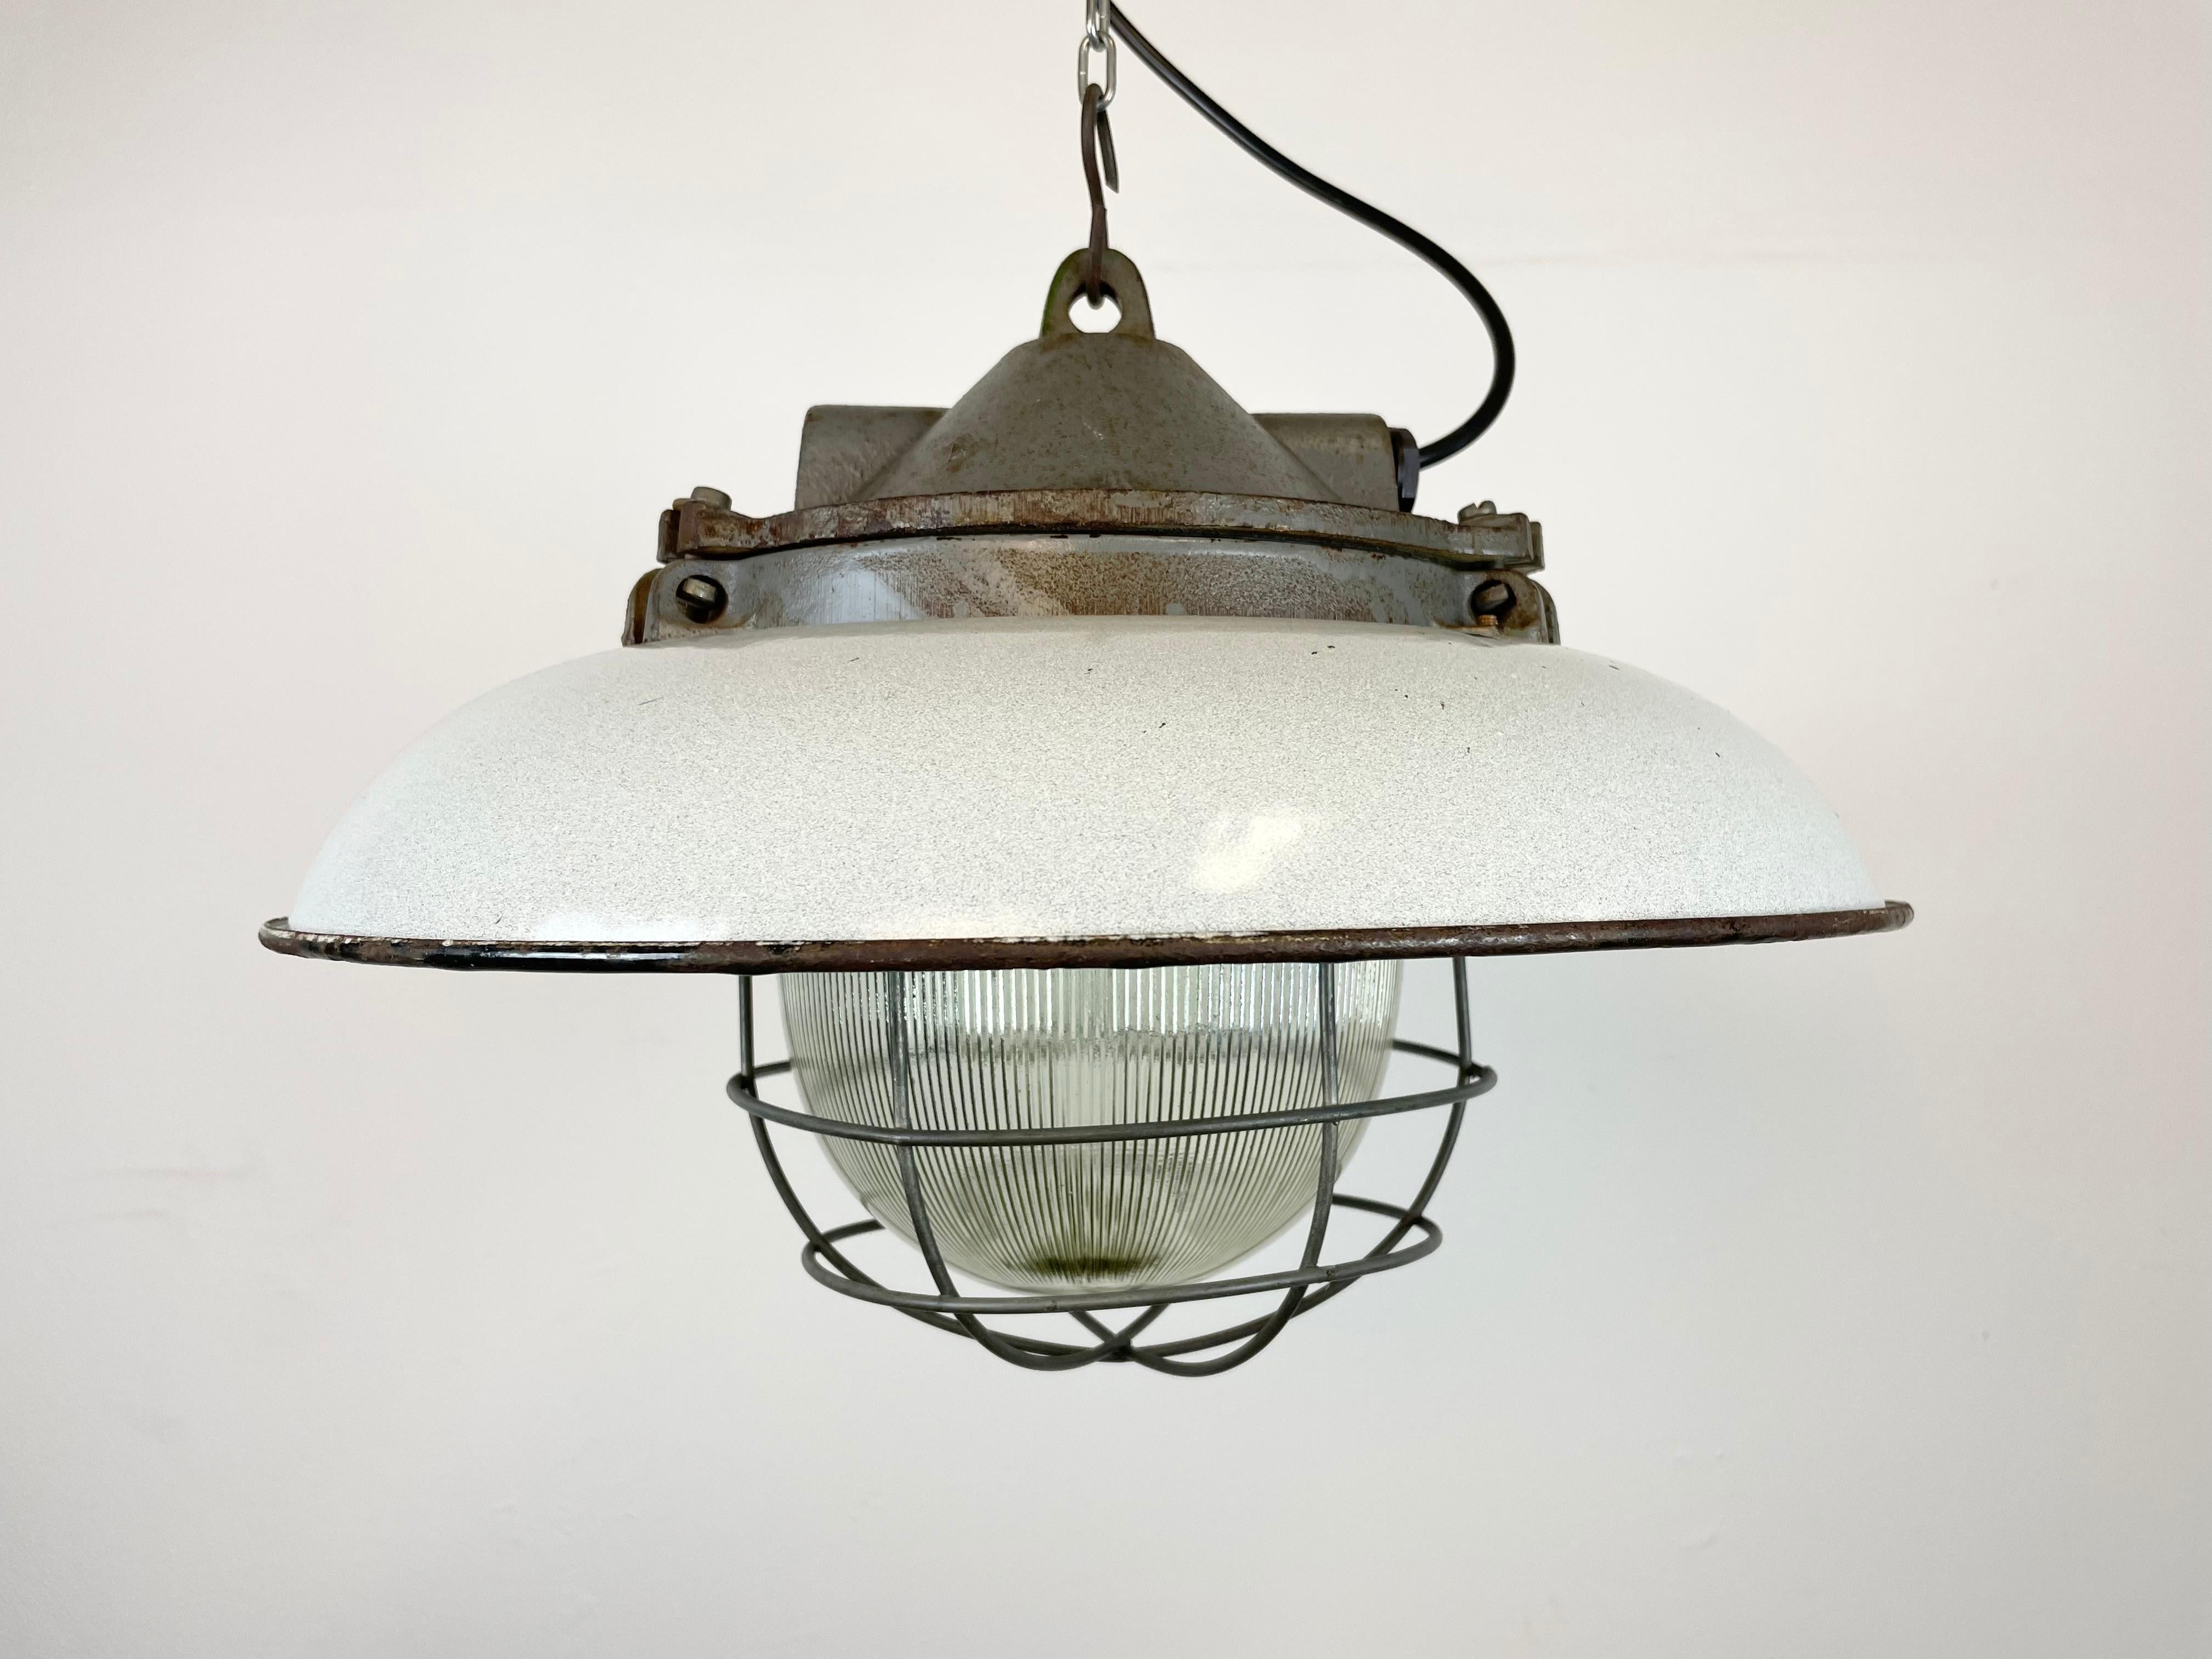 - Industrial factory pendant lamp in cast iron
- Manufactured by Zaos in Poland during the 1960s
- Light grey enamel shade with white enamel interior 
- Holophane glass cover and iron grid
- Weight: 7 kg.